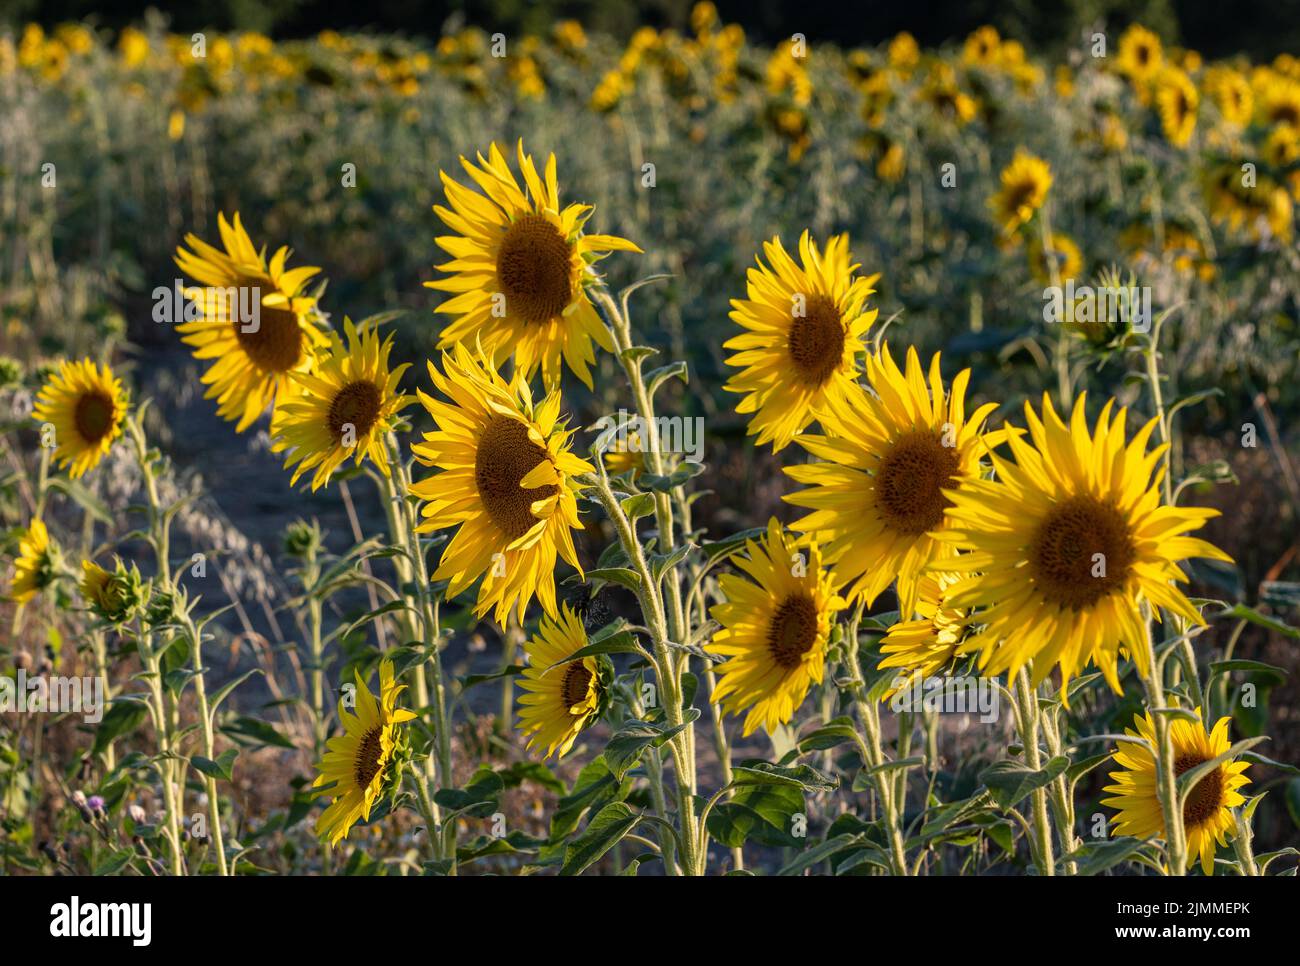 Field of sunflowers during August or summer in evening light, Hampshire, England, UK Stock Photo